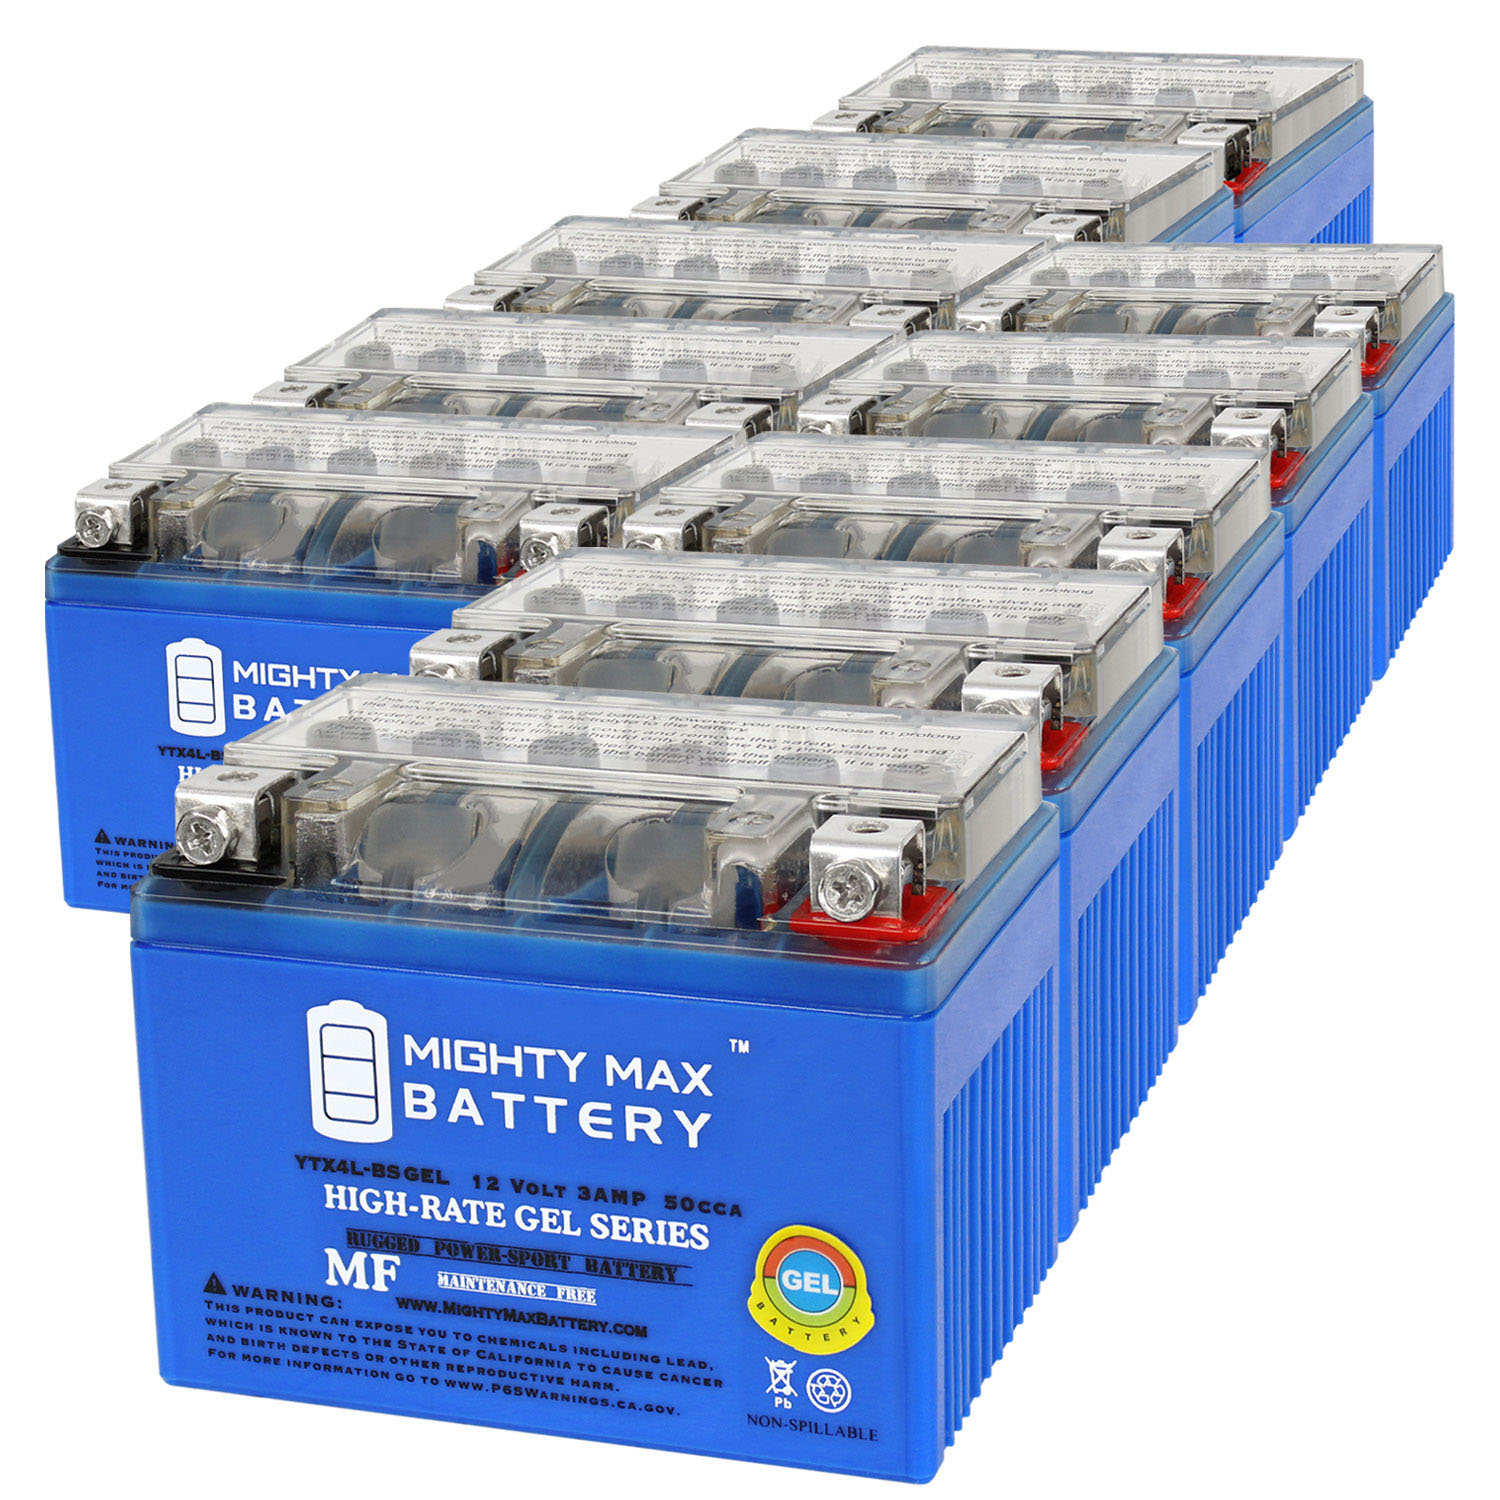 YTX4L-BSGEL 12V 3AH GEL Replacement Battery compatible with Battery Tender BTL24A480CW - 10 Pack